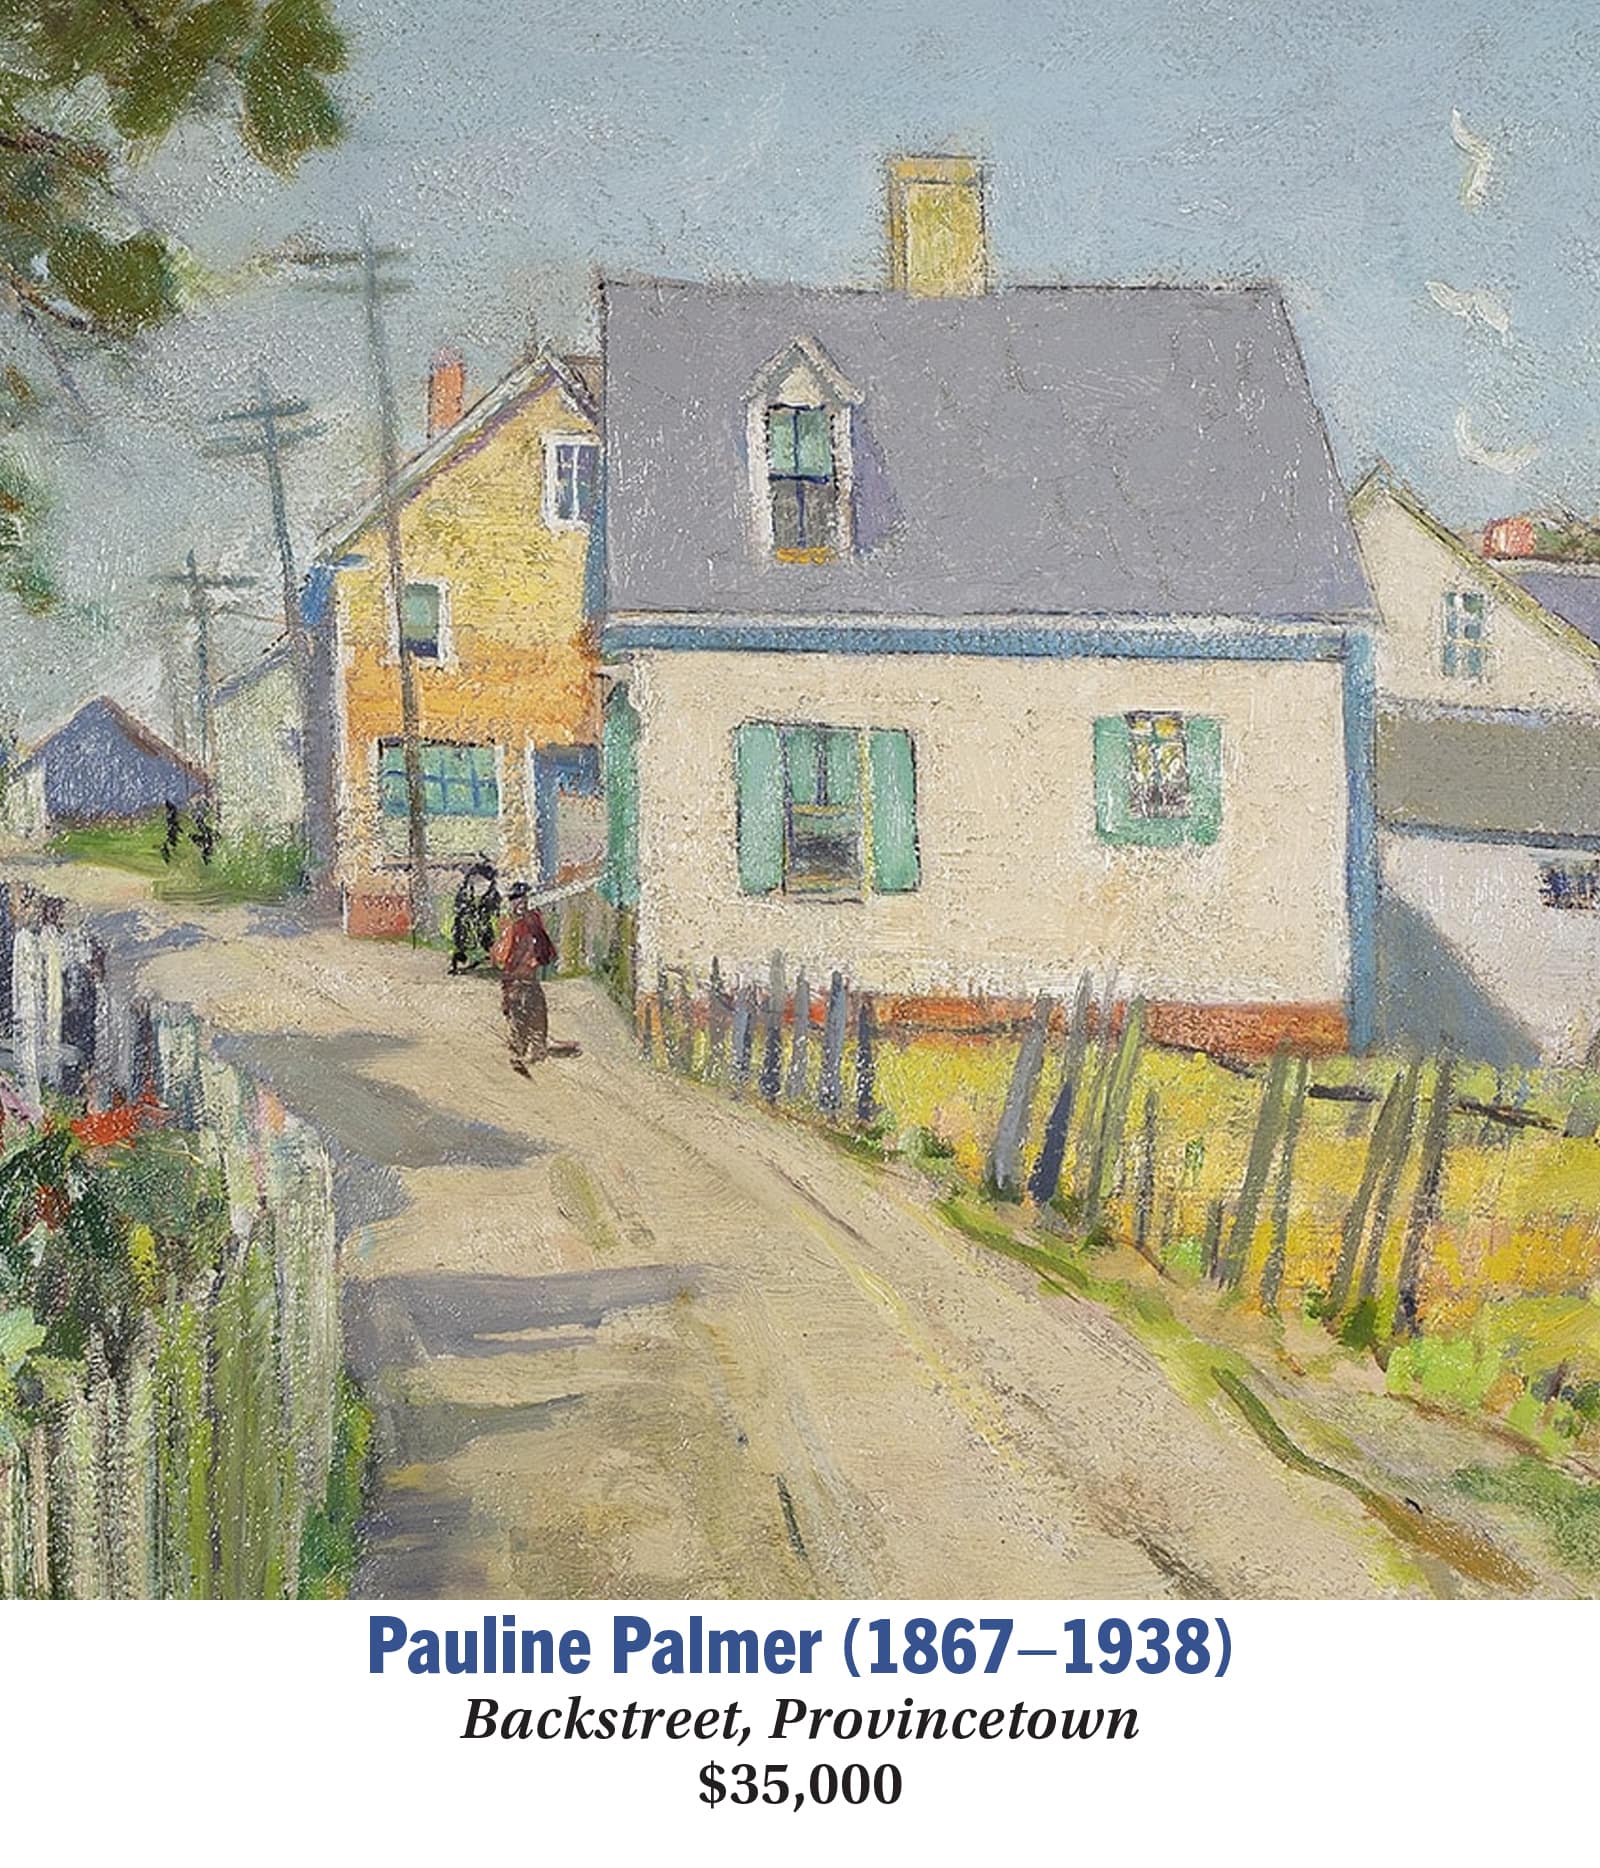 Pauline Palmer (1867–1938), Backstreet, Provincetown, Oil on board, American impressionist painting, detail image